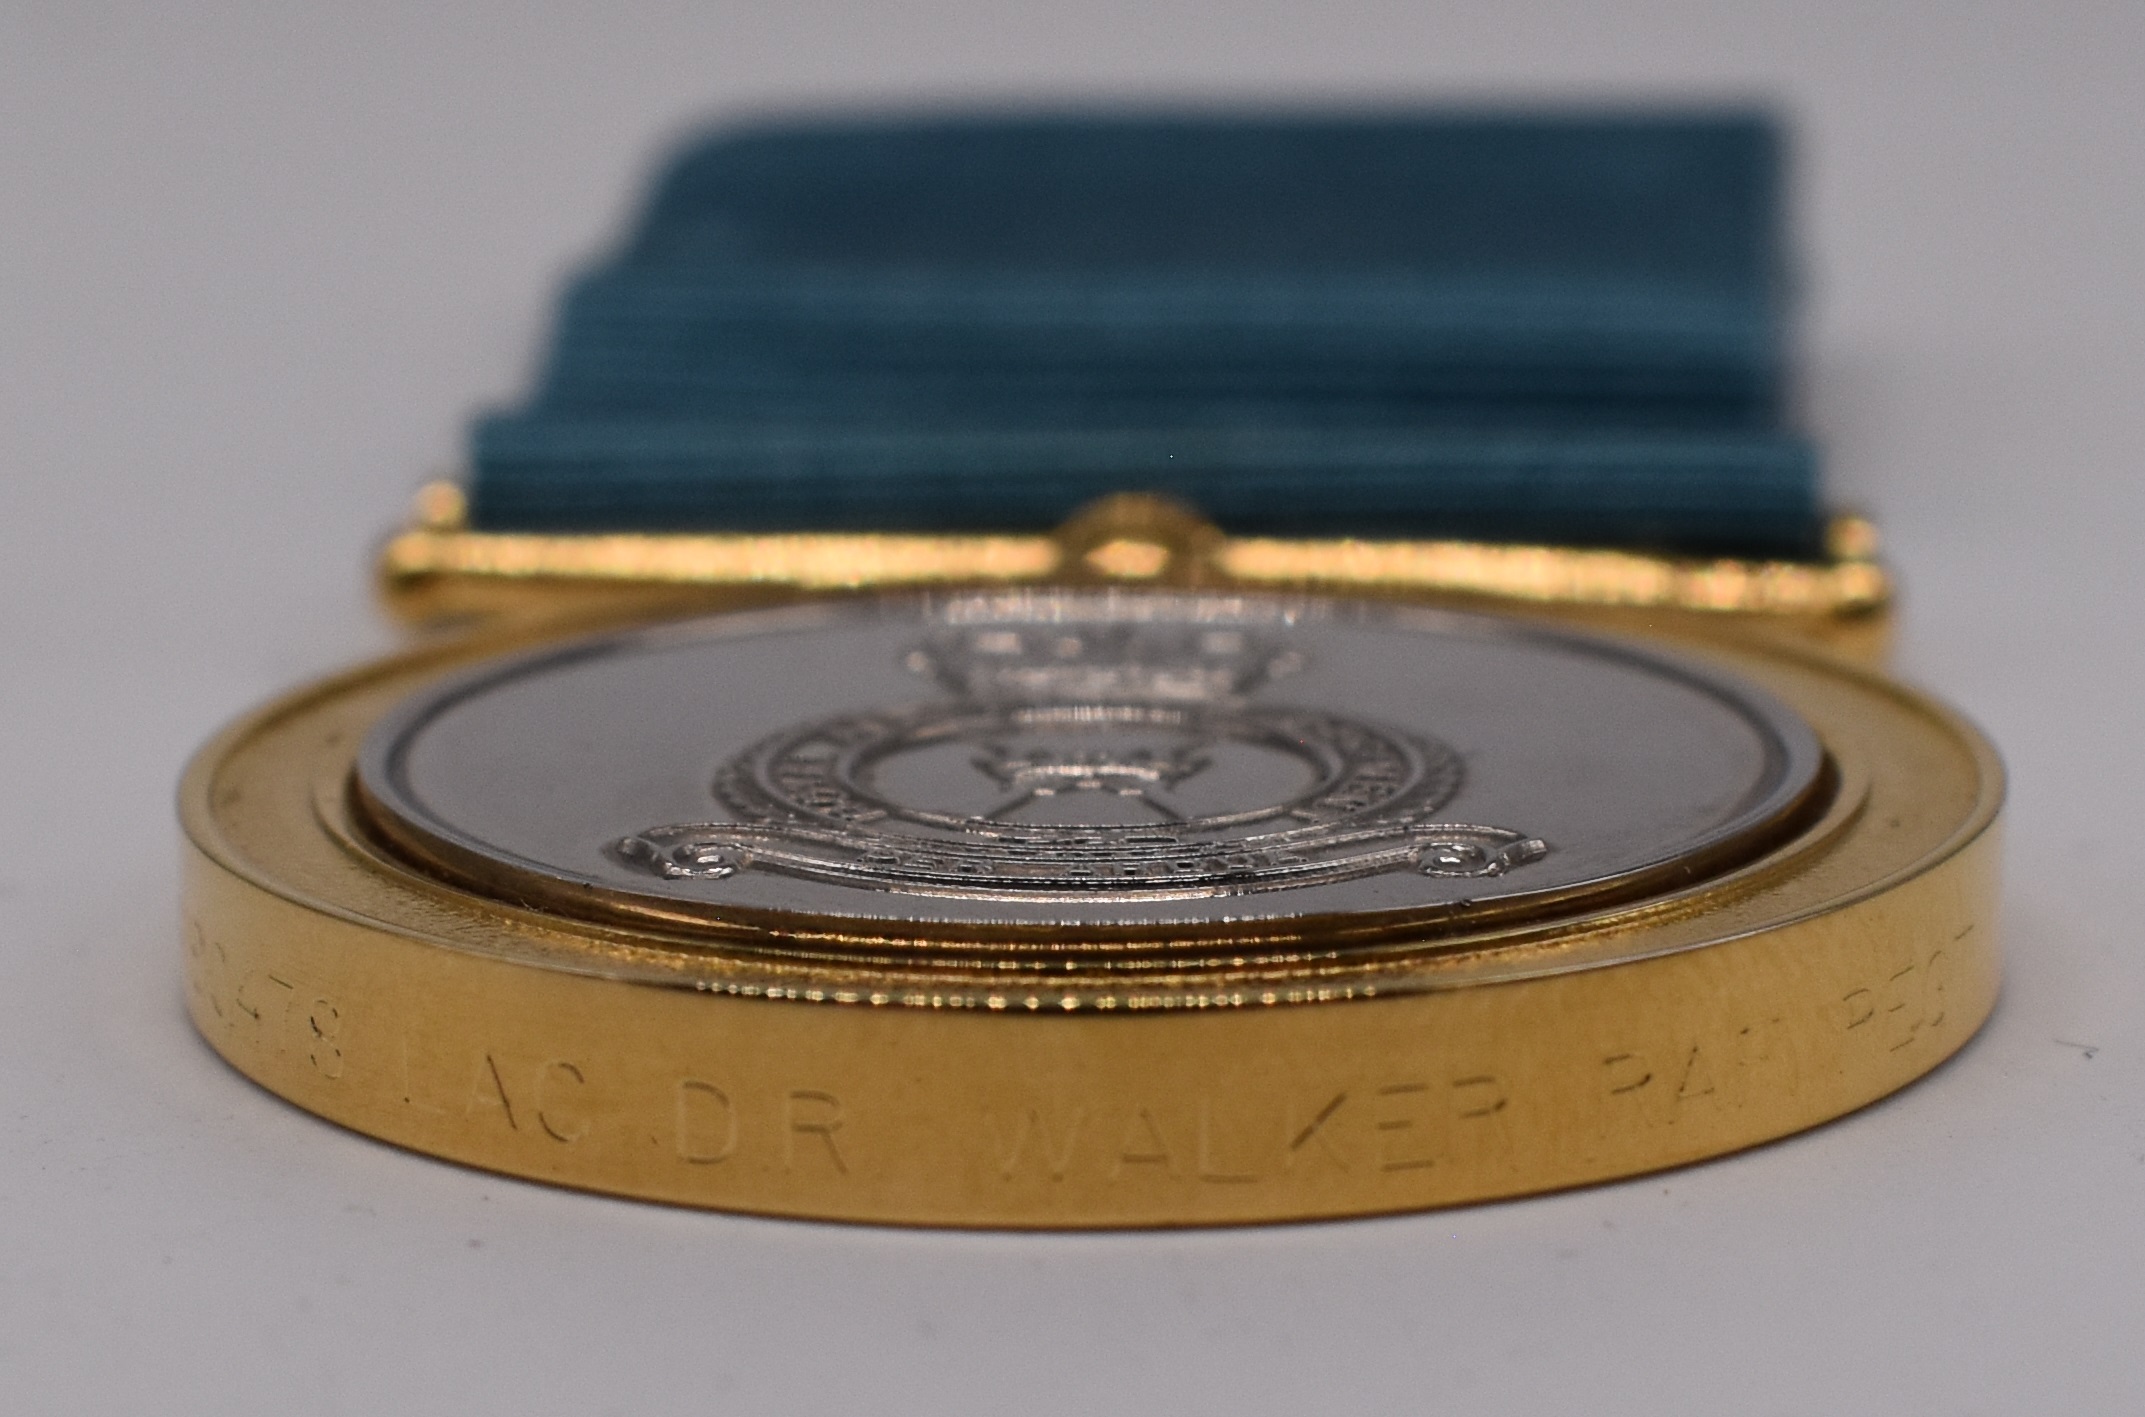 British Army WW1 replacement medals comprising 1914 Star, War Medal and Victory Medal, named to 1357 - Image 4 of 5